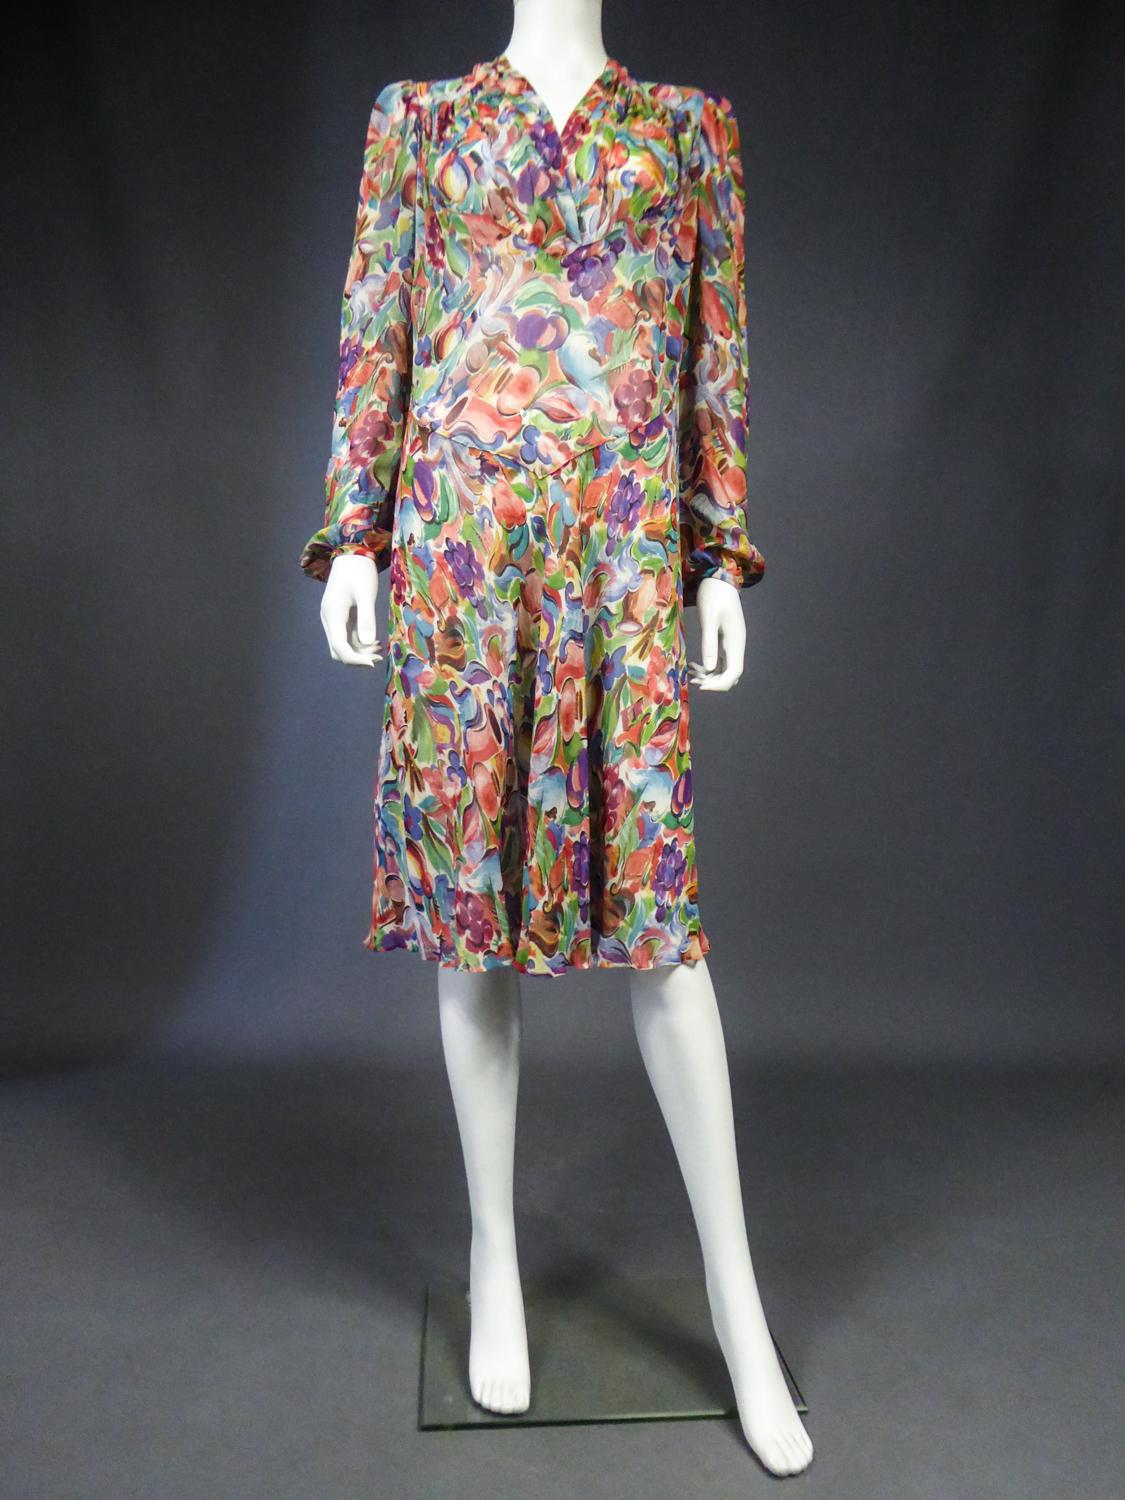 Circa 1940/1950
France

Beautiful summer dress in printed silk crepe dating from the 1940s / 1950s. Dense printing with strong polychromy with patterns of fruits, grapes, peach flowers, jars, fountains and architectural elements. Straight dress with